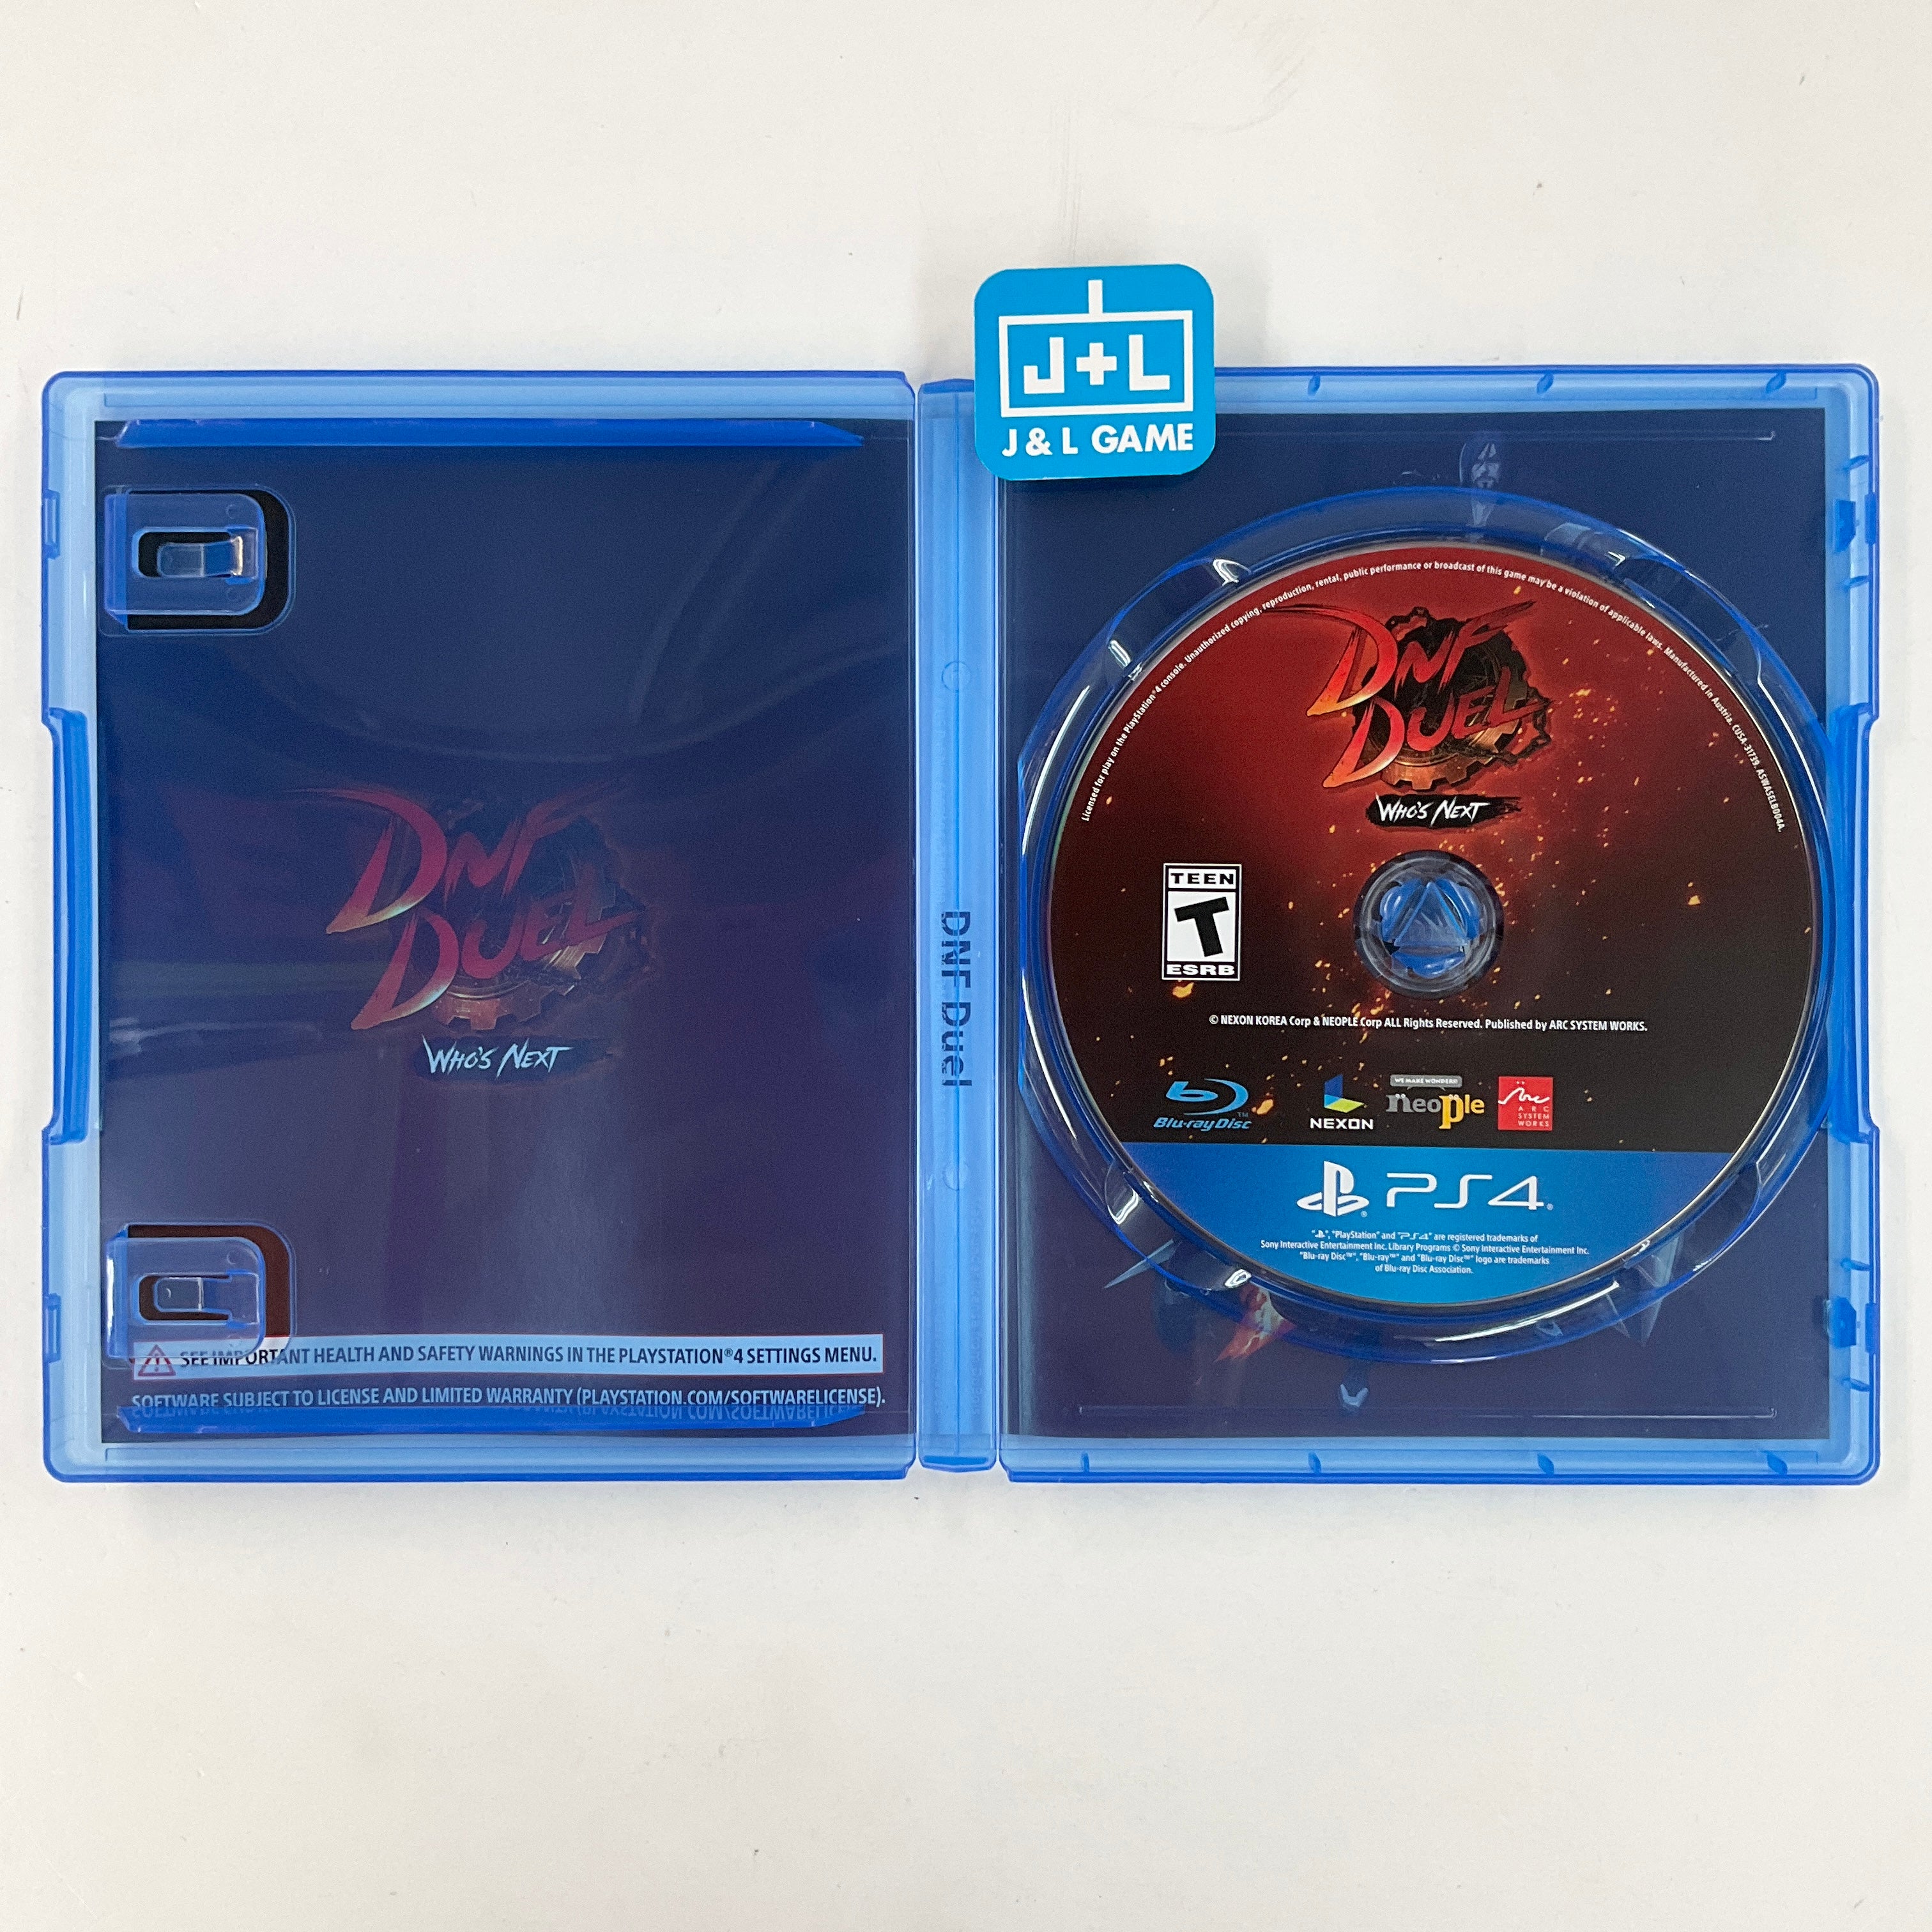 DNF Duel - (PS4) PlayStation 4 [UNBOXING] Video Games Arc System Works   